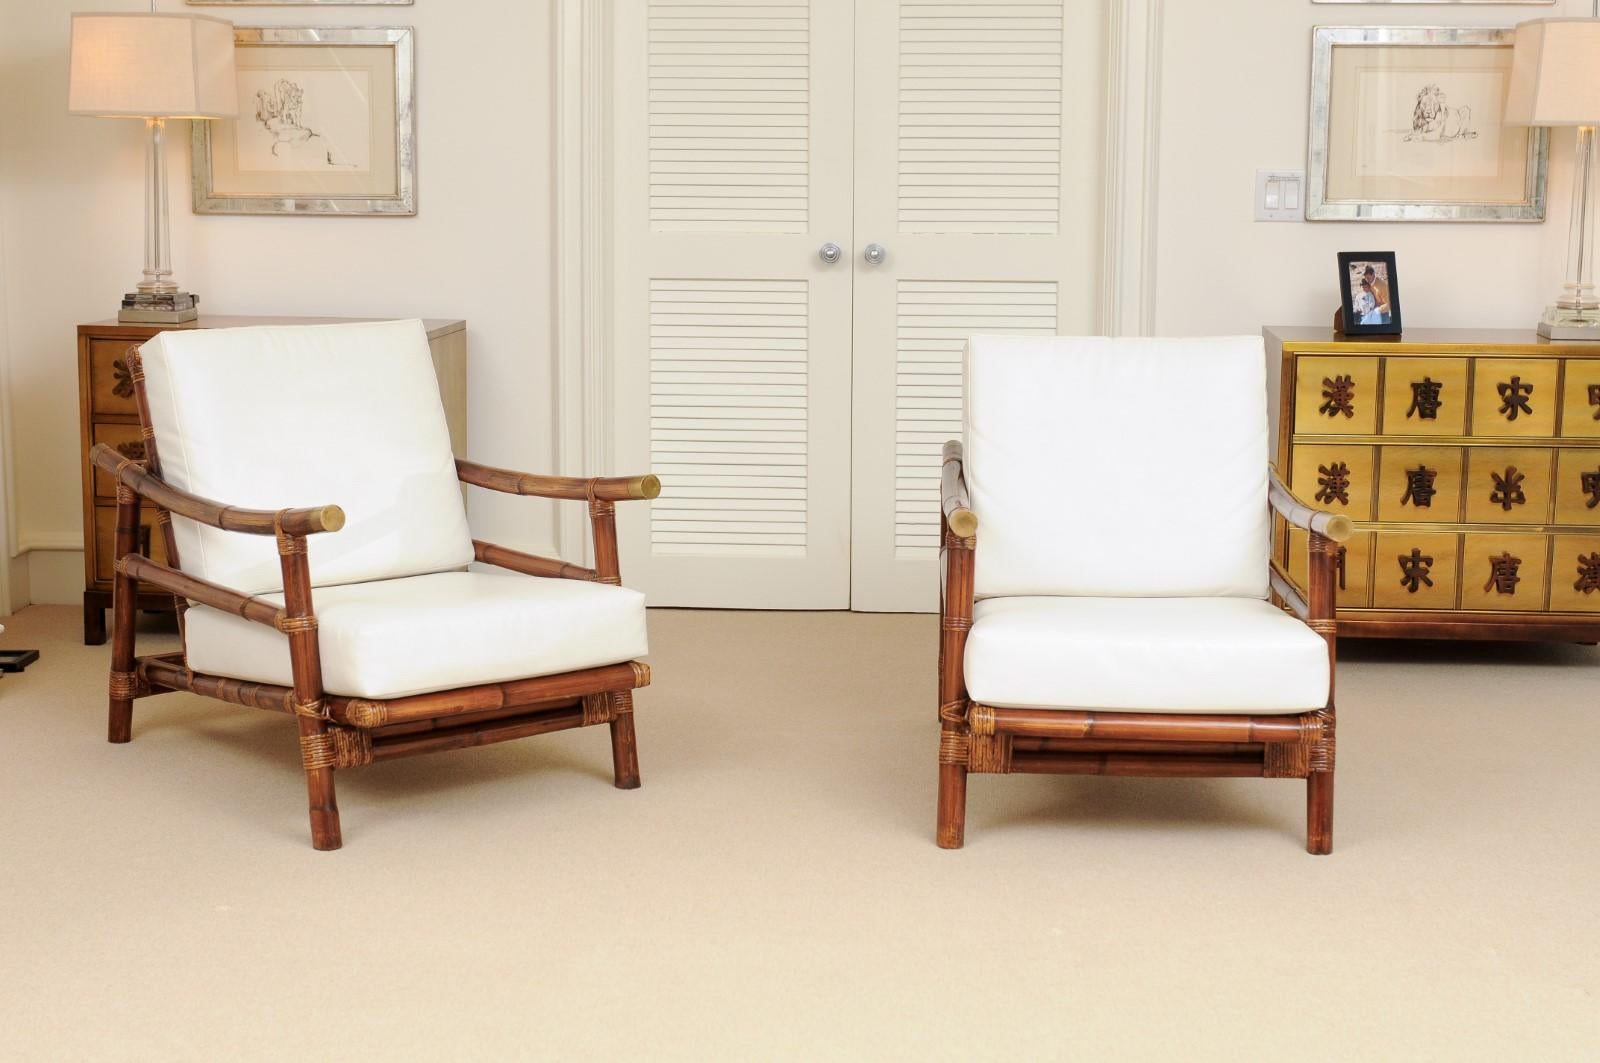 These magnificent lounge chairs are shipped as professionally photographed and described in the listing narrative: Meticulously professionally restored and upholstered. The chairs are installation ready. Expert custom upholstery service is